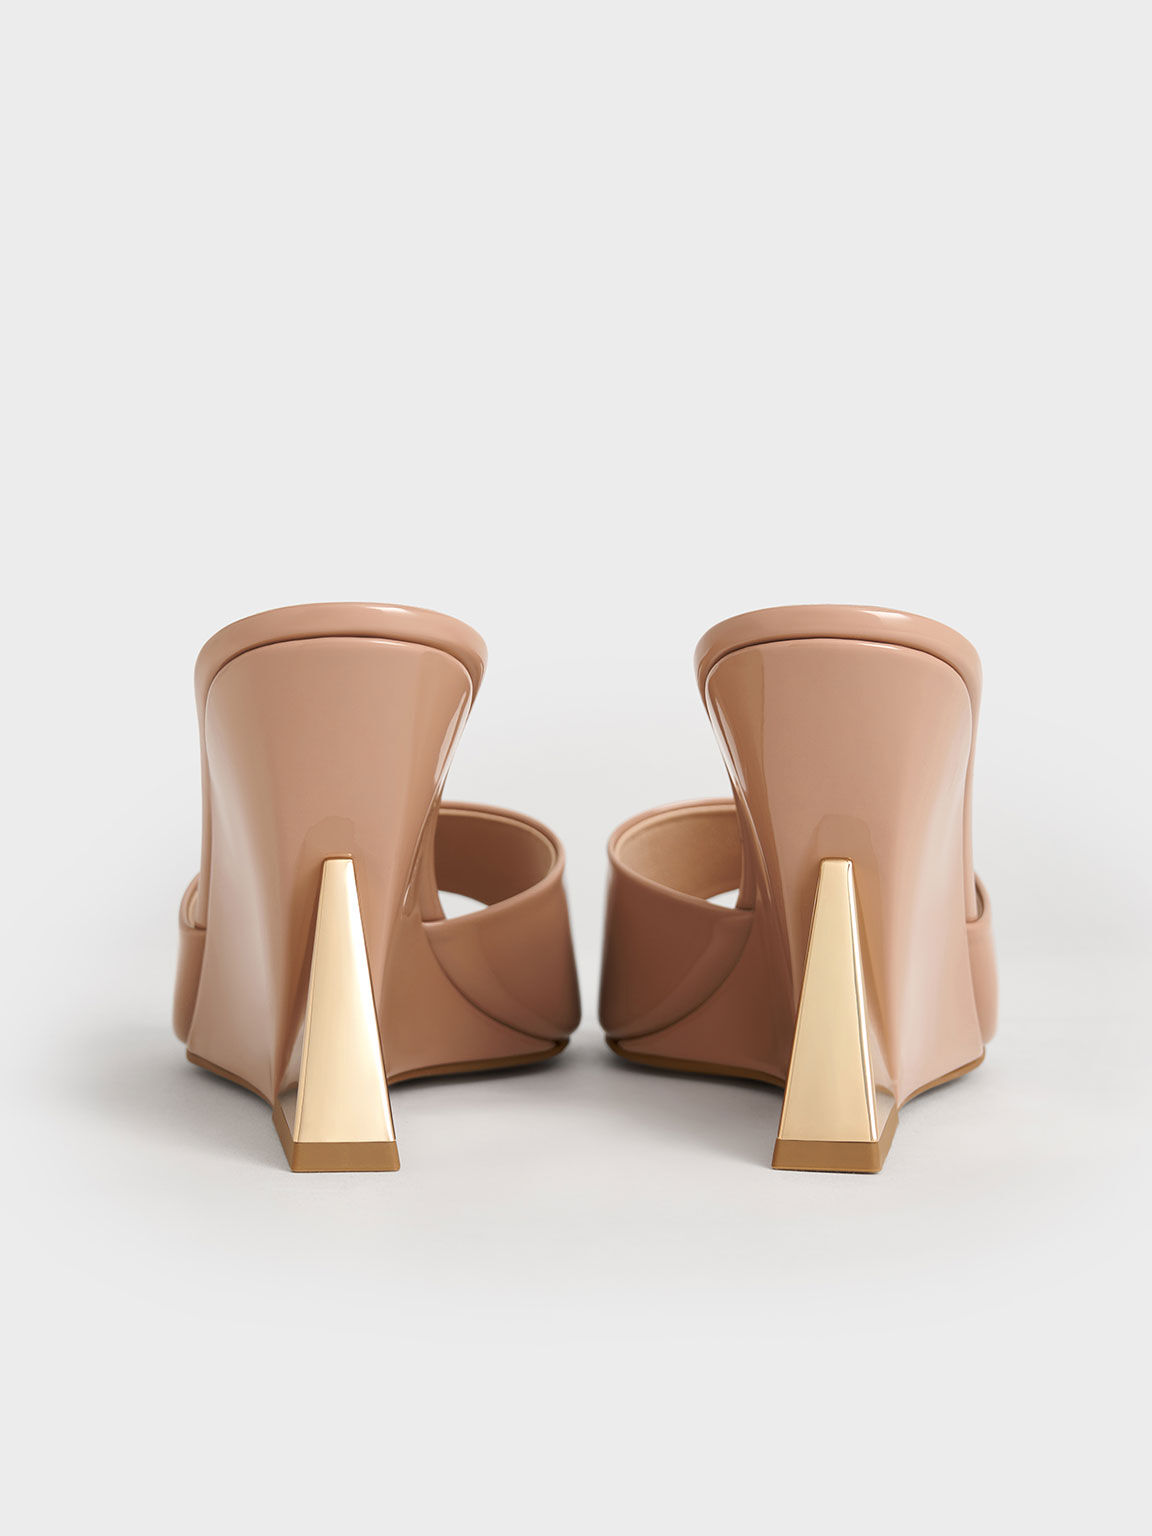 Giày mules đế xuồng Patent Triangle-Heel, Nude, hi-res